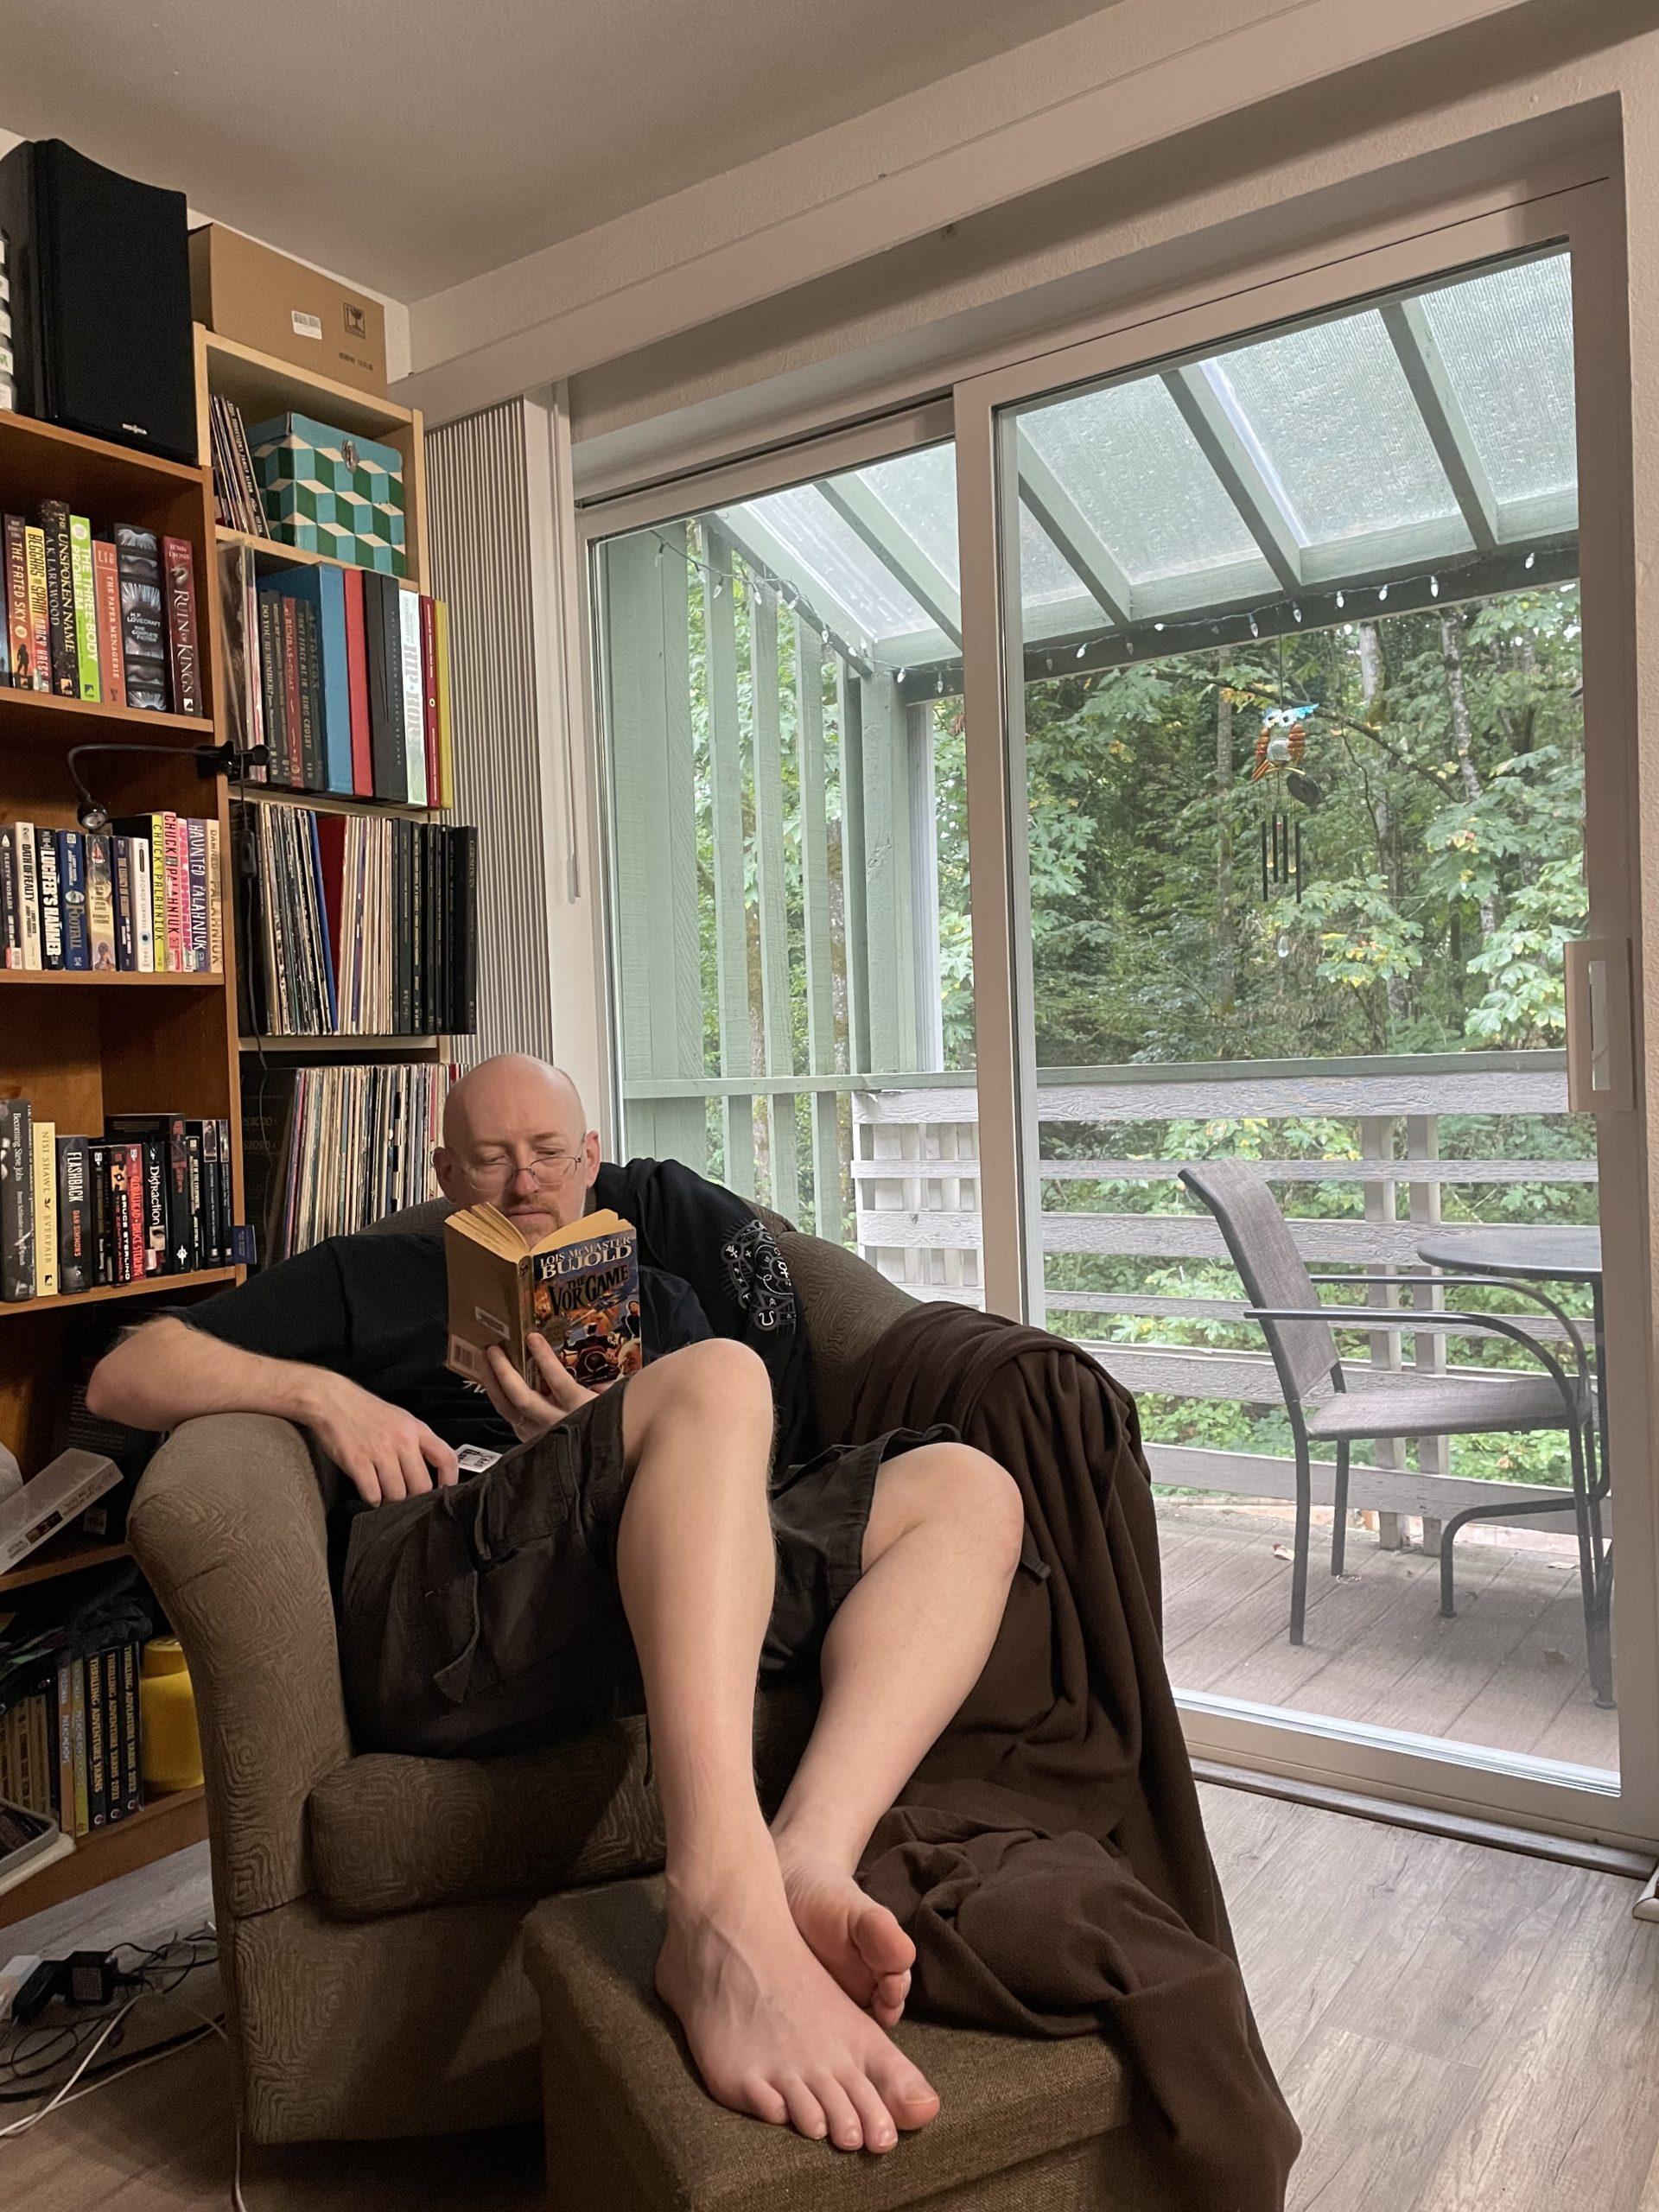 Me sitting in our living room in a comfortable chair with my feet on an ottoman, reading a book. Books and vinyl records are visible on the shelves behind me, and green trees can be seen through a glass sliding door leading onto a deck.